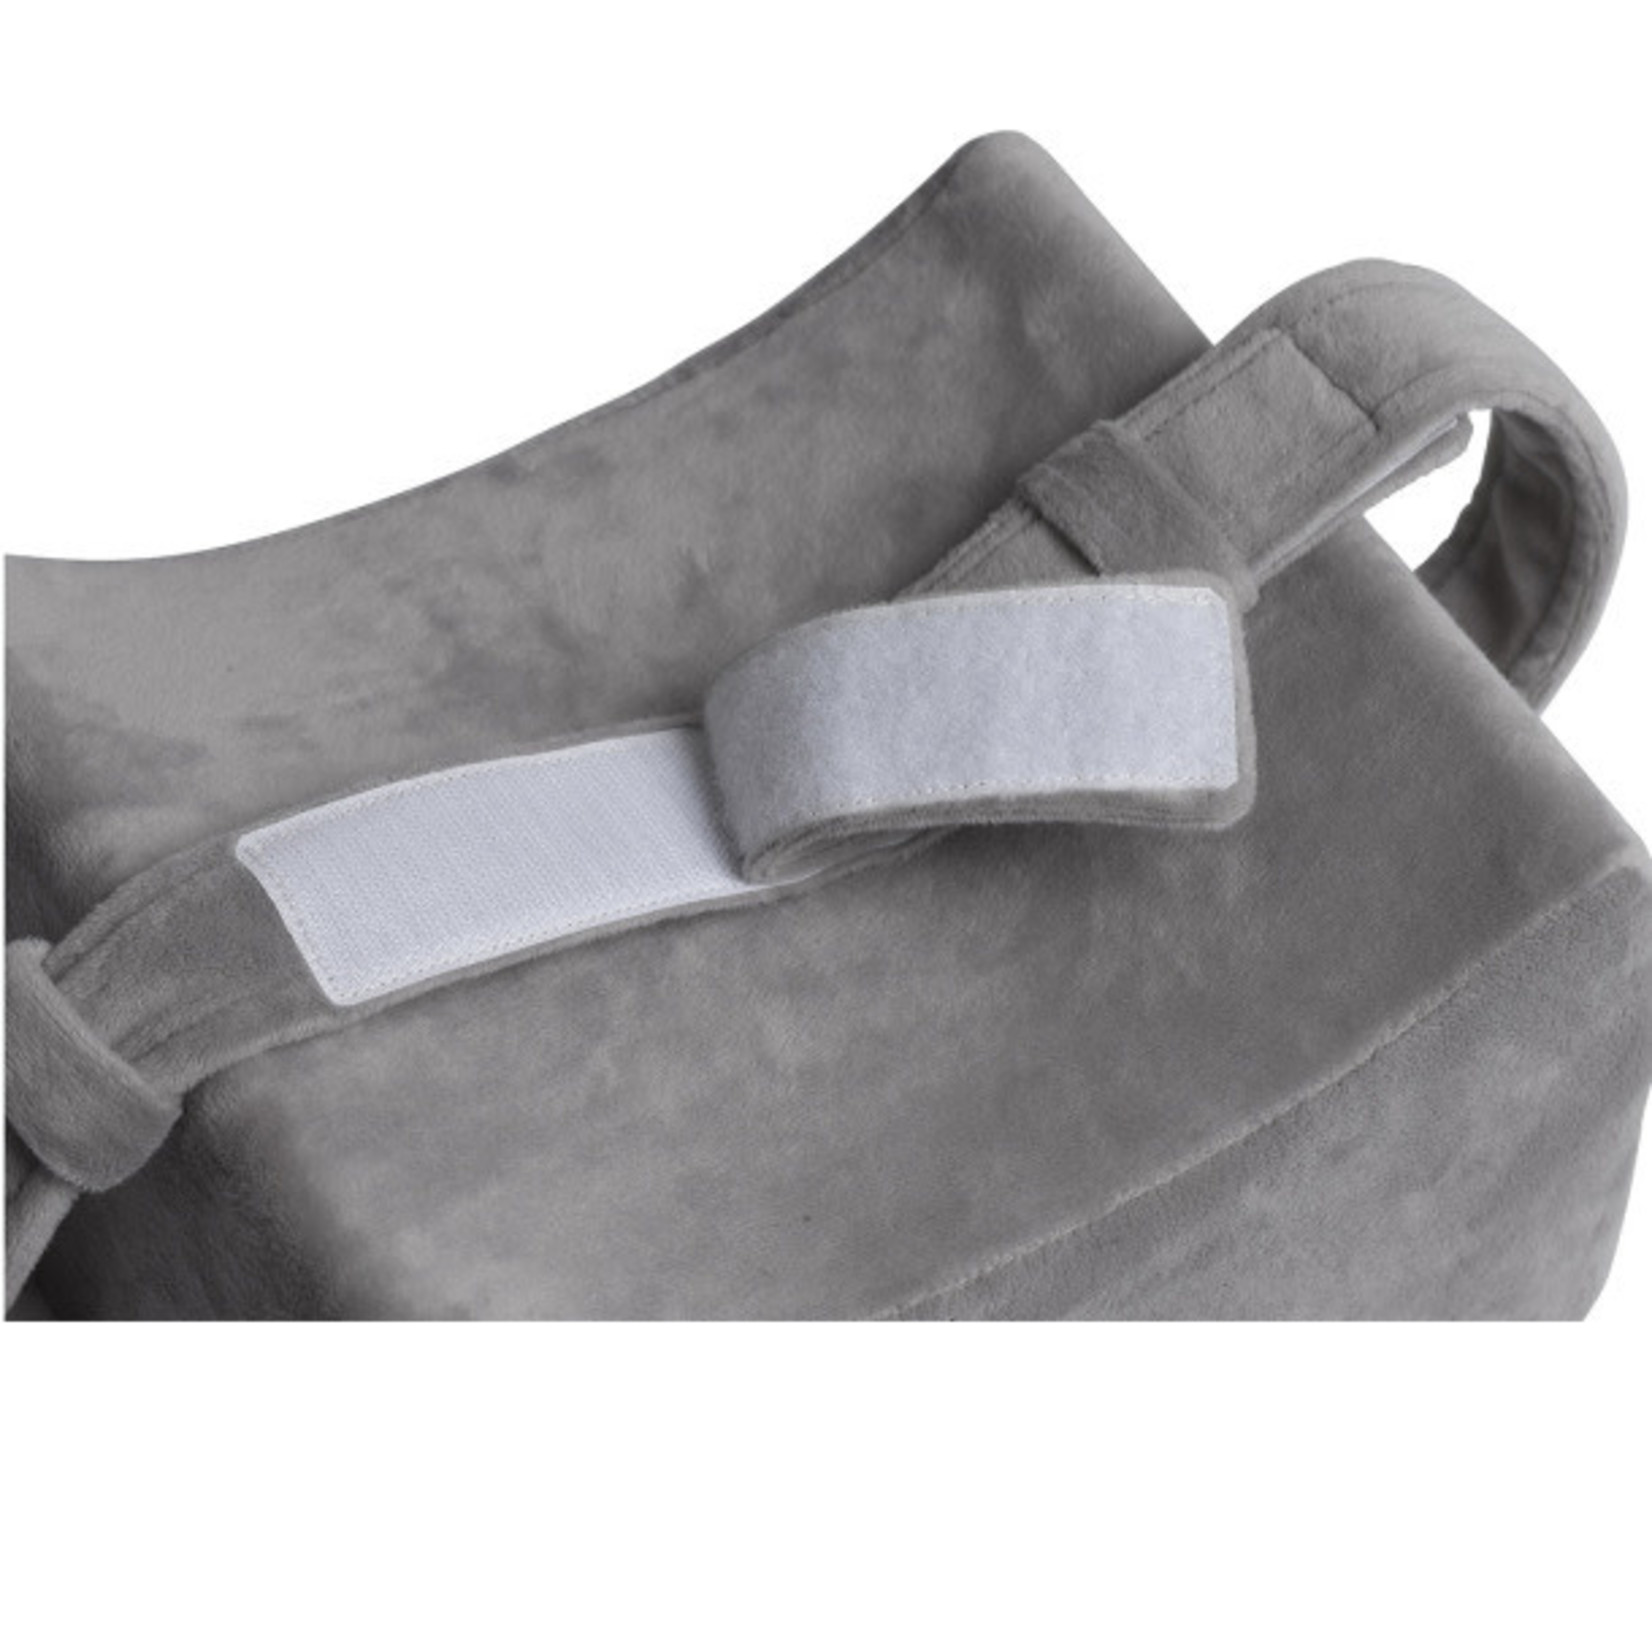 Drive Comfort Touch Knee Support Cushion